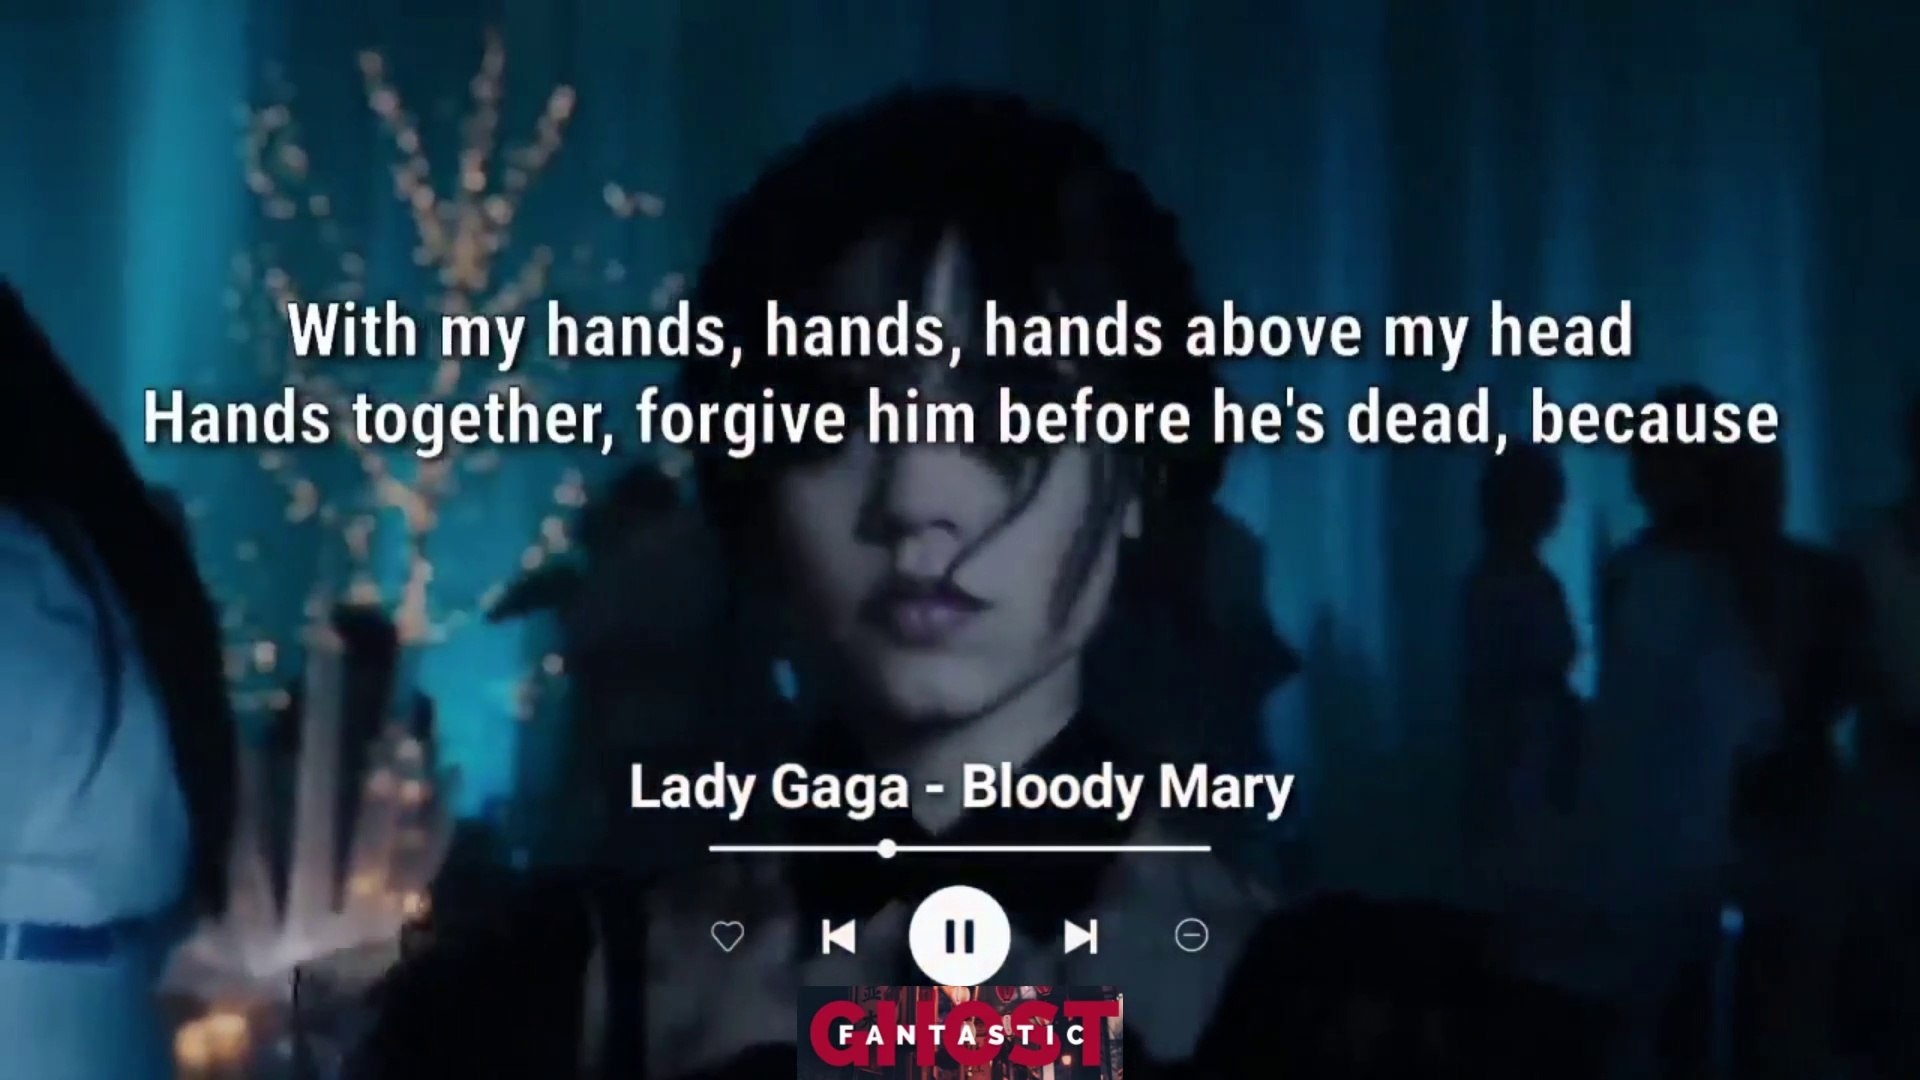 Bloody Mary - Lady Gaga ~I'll dance, dance with my hands~